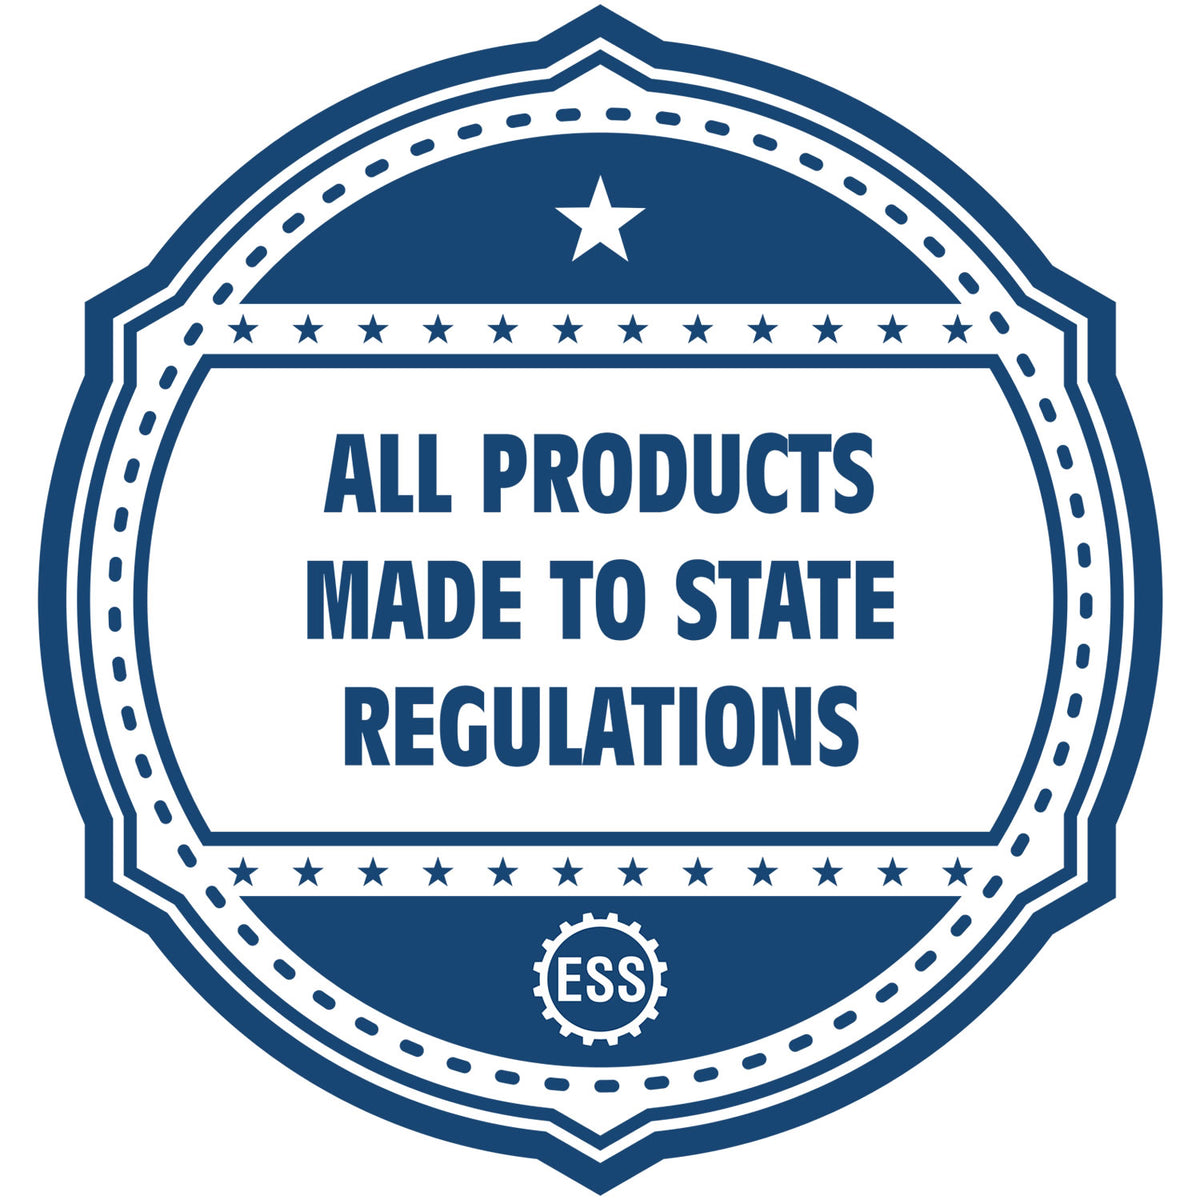 A blue icon or badge for the Gift Arkansas Engineer Seal showing that this product is made in compliance with state regulations.